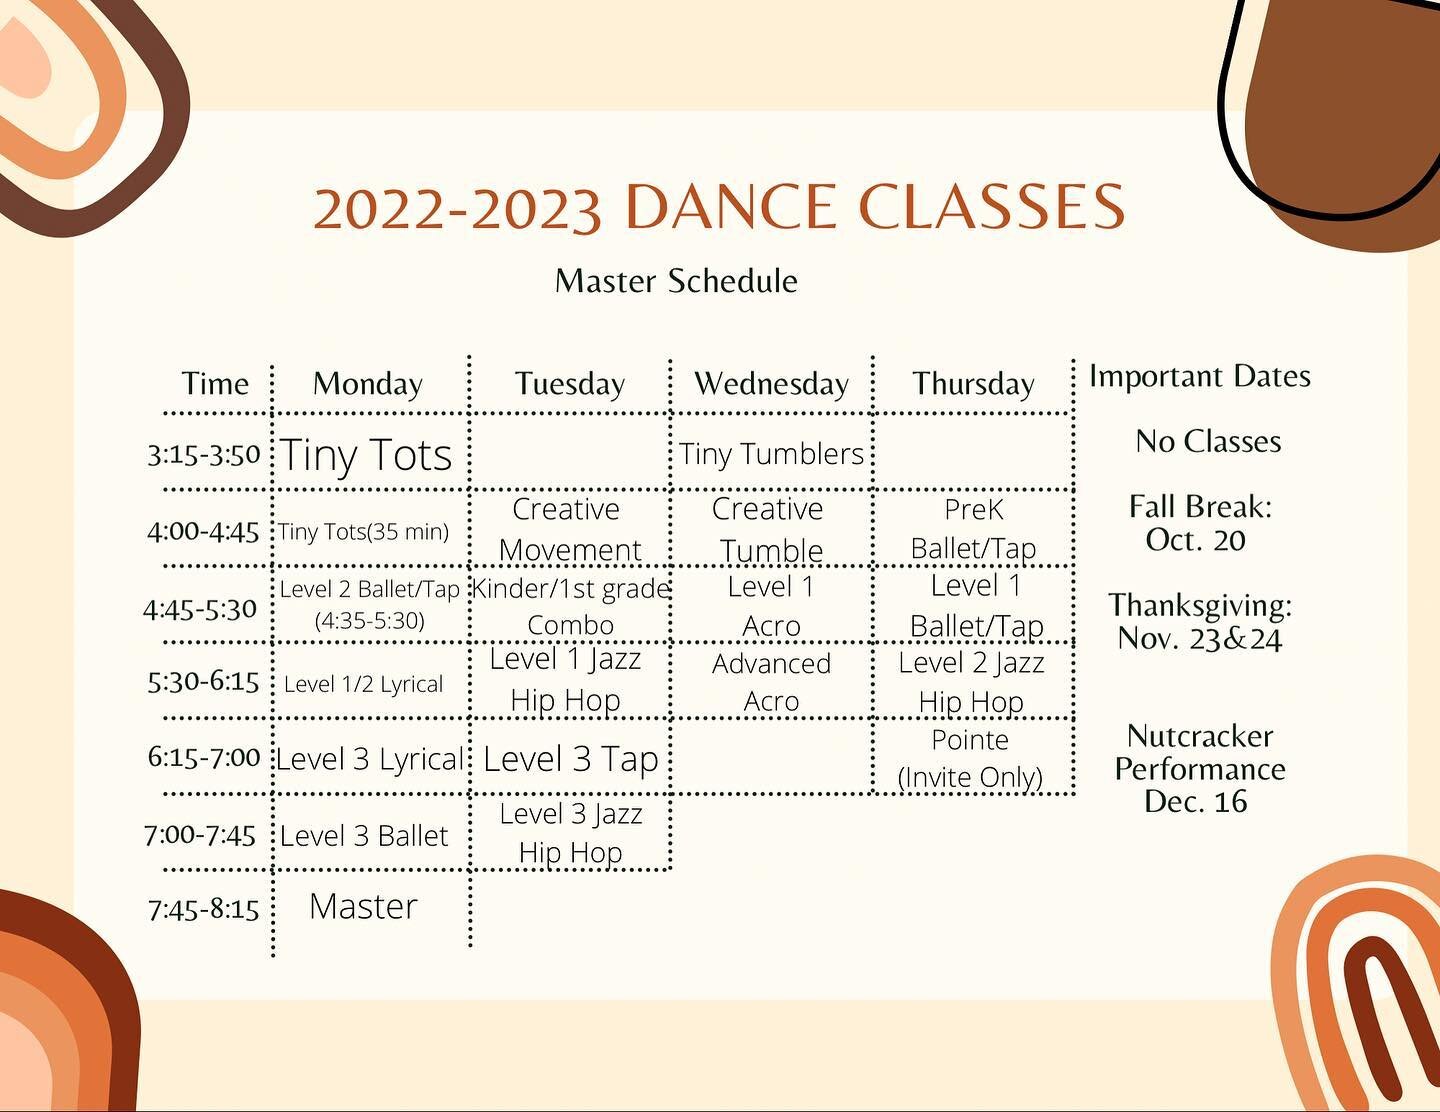 Planning out your fall schedule? Check out our 2022-2023 Dance Schedule! We are happy to answer any questions you have about it!